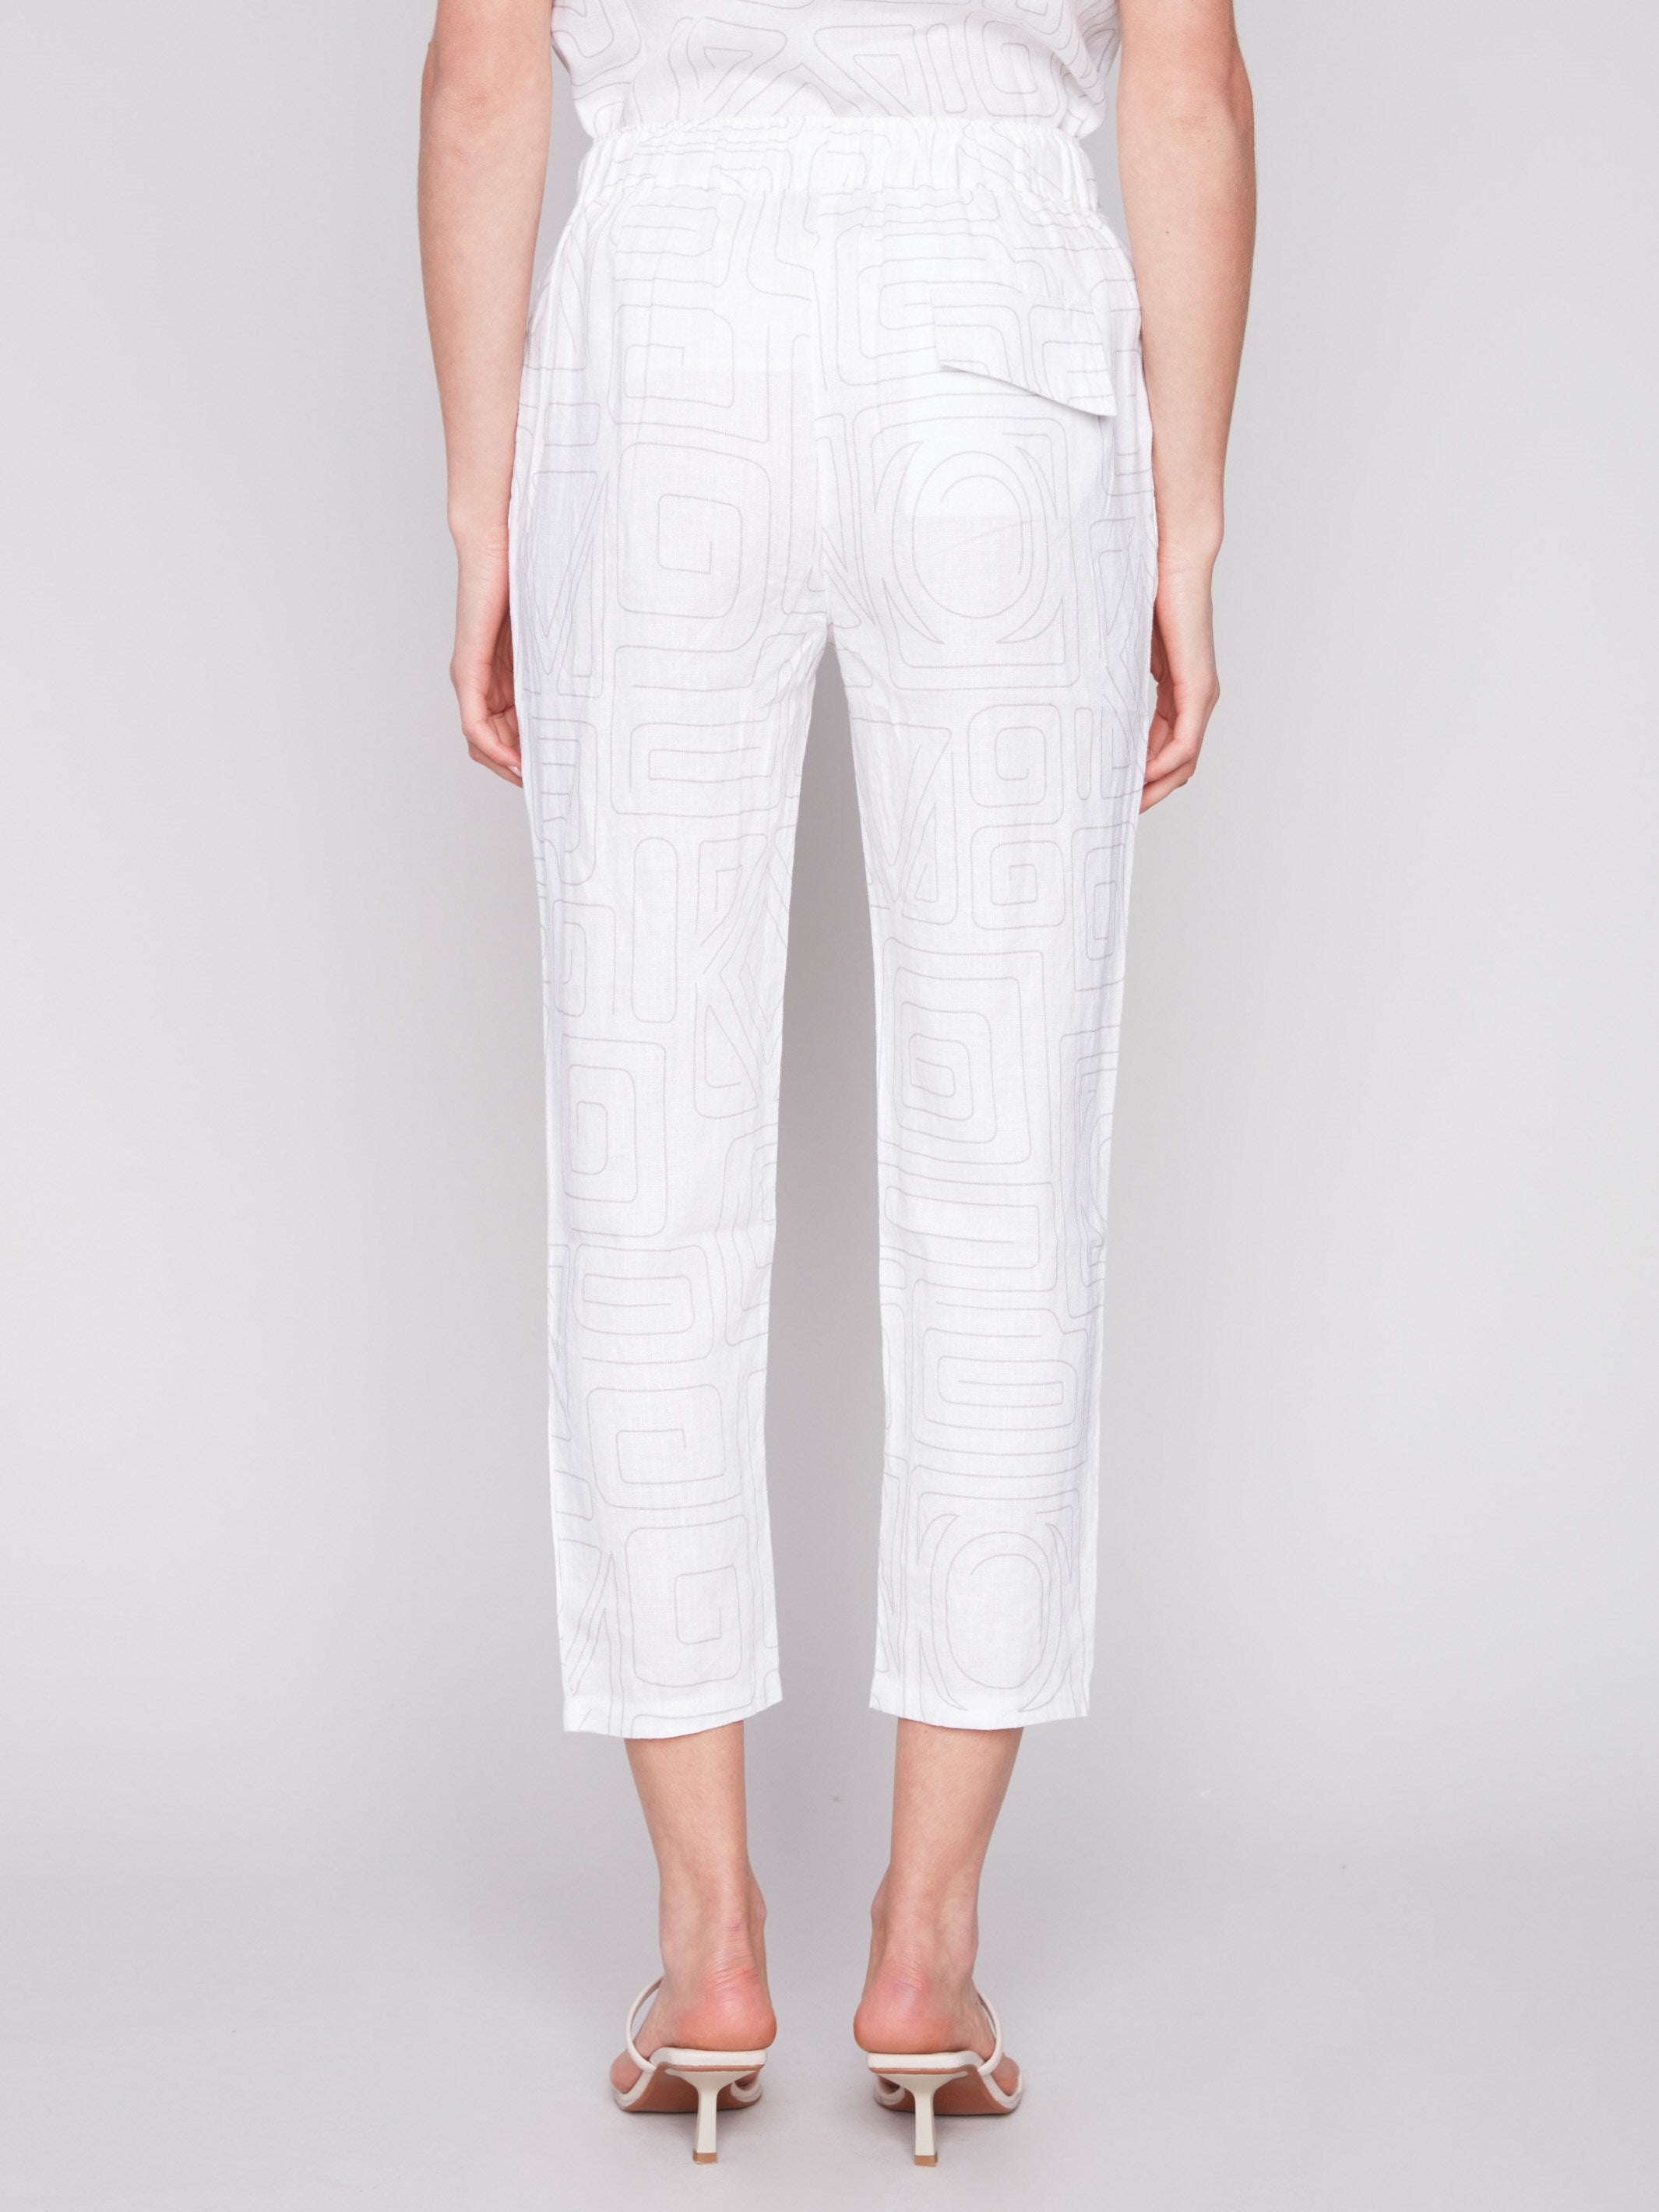 Linen Jogger Pants with Button Detail - Light Grey - Charlie B Collection Canada - Image 3